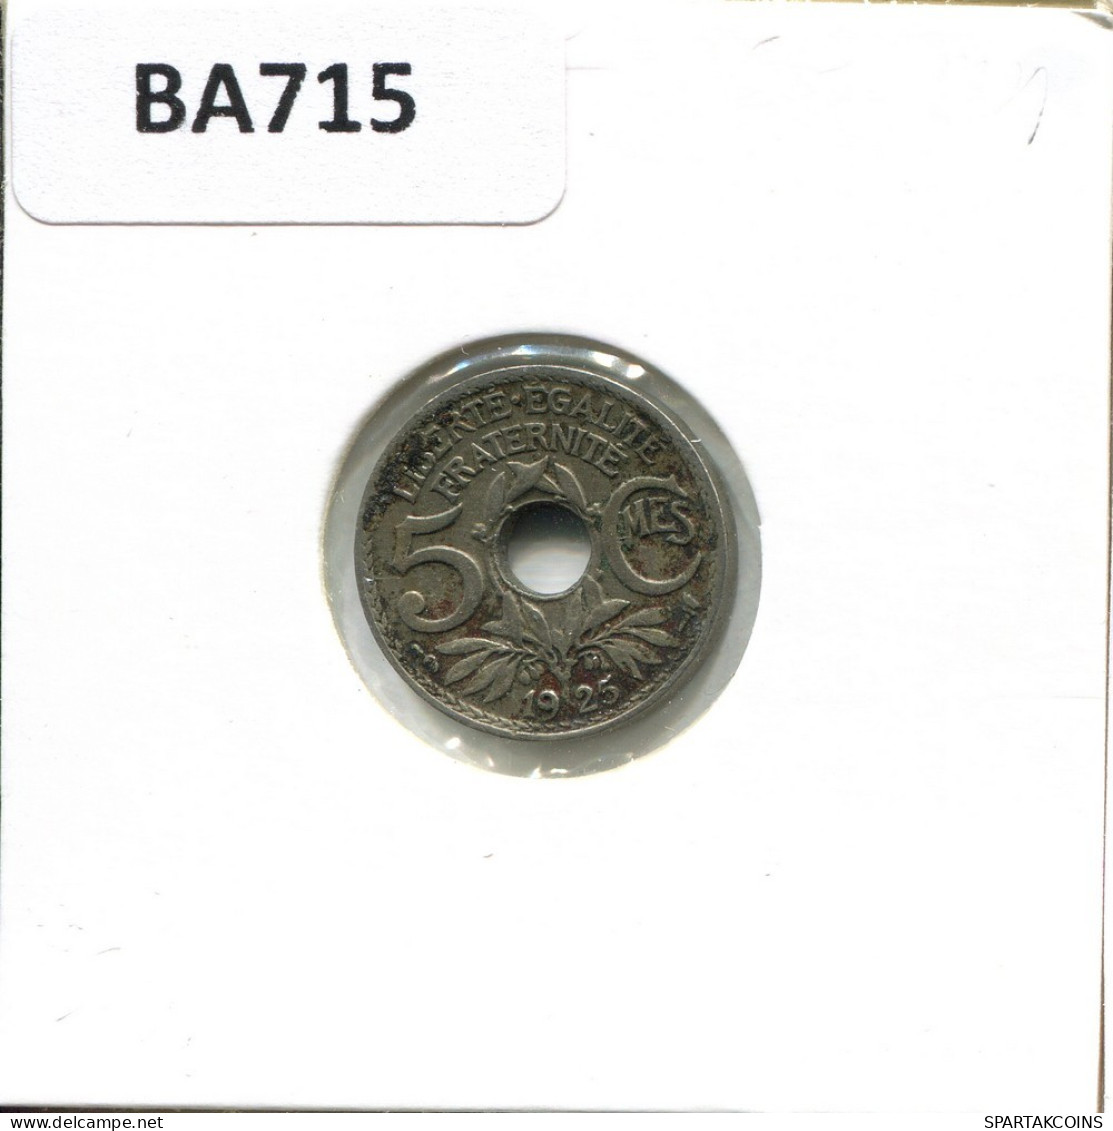 5 CENTIMES 1925 FRANCE French Coin #BA715.U.A - 5 Centimes